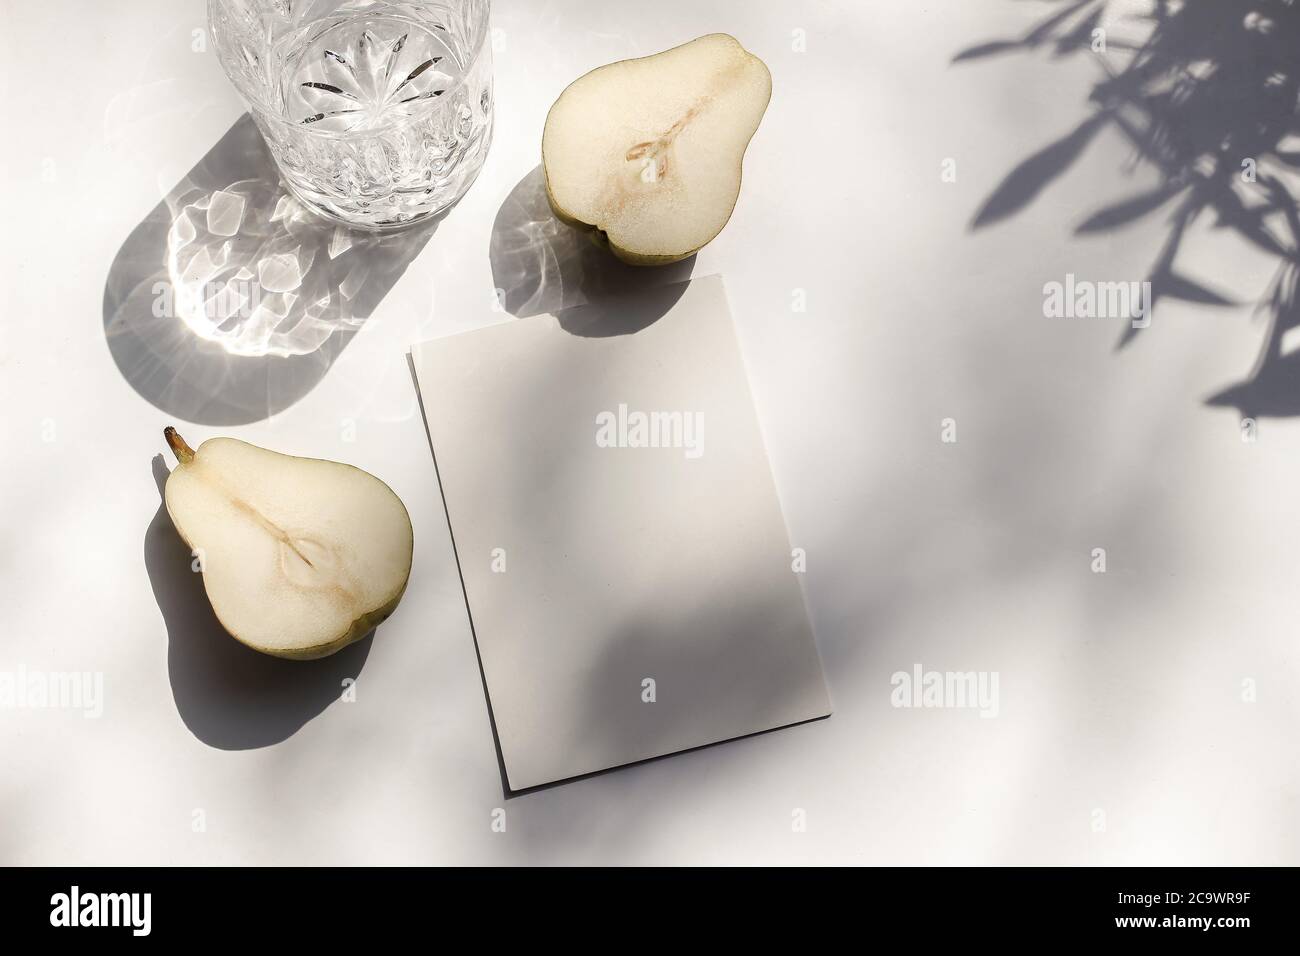 Summer stationery still life scene. Glass of water and cut pear fruit in sunlight. White table. Blank paper card, invitation mockup scene, olive Stock Photo